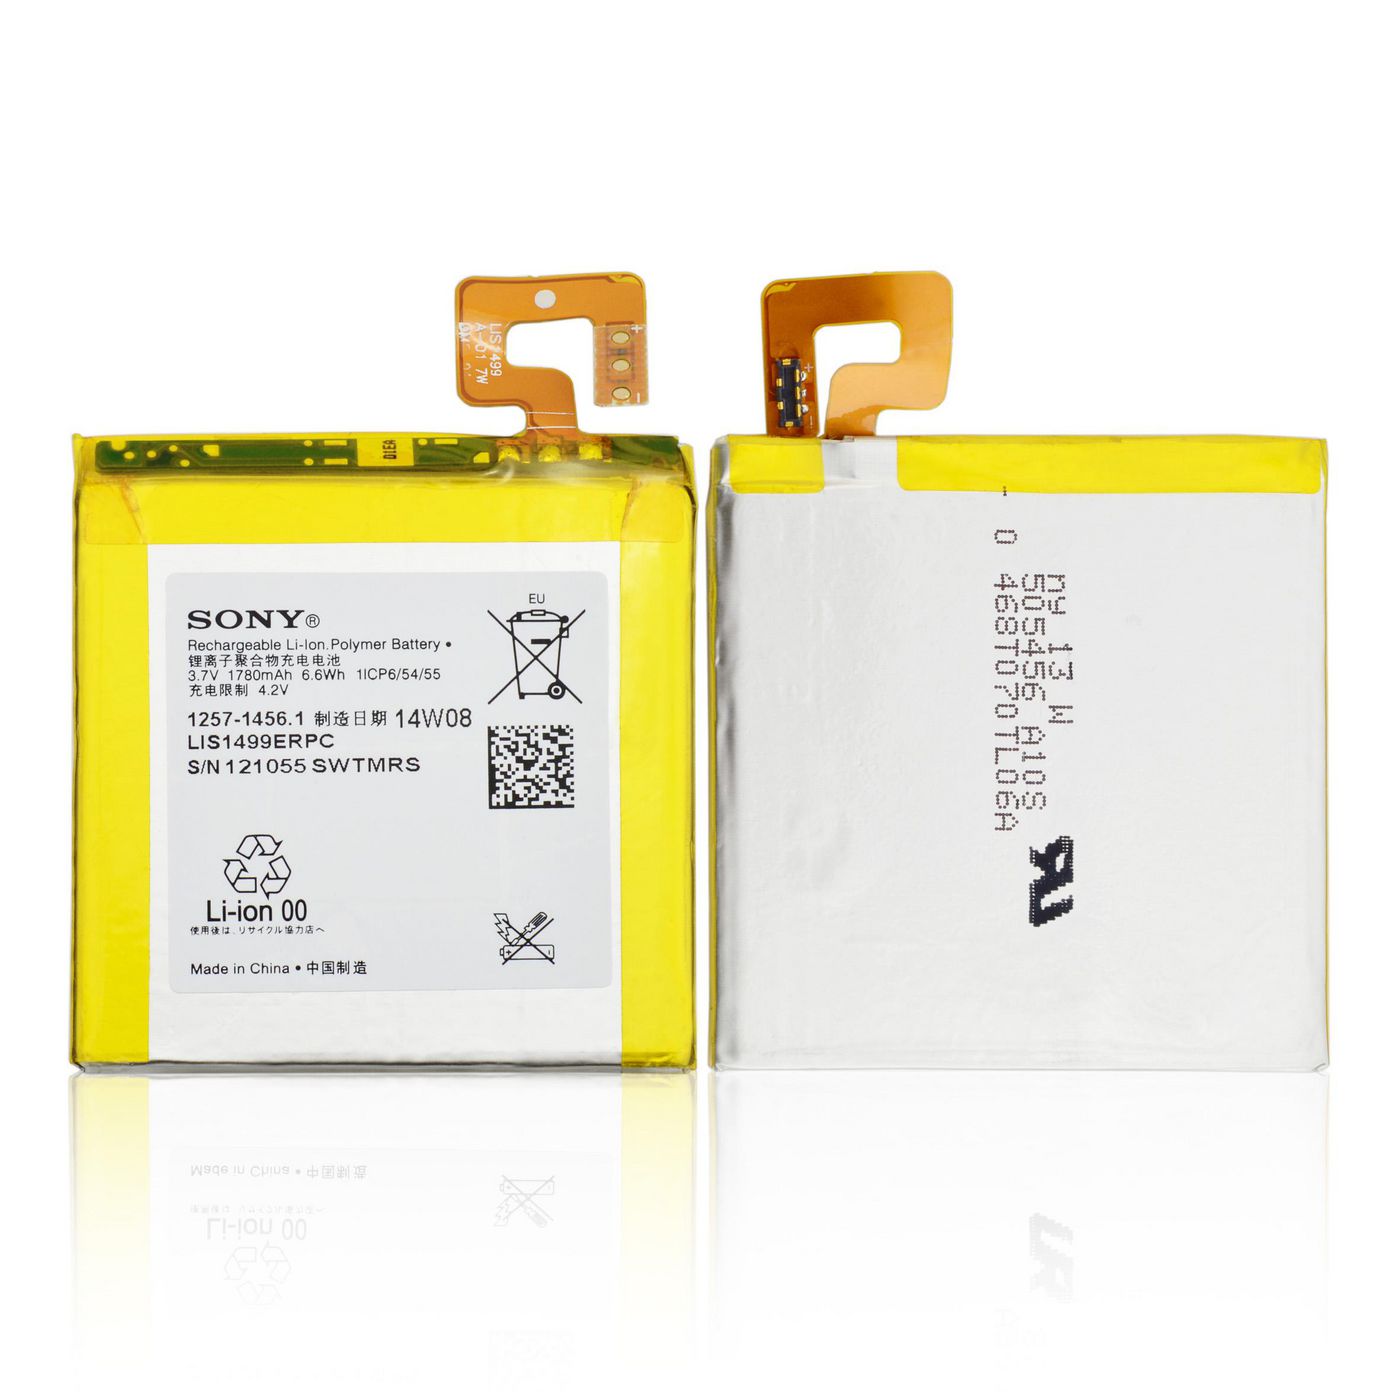 CoreParts MSPP70425 Battery for Sony Mobile 